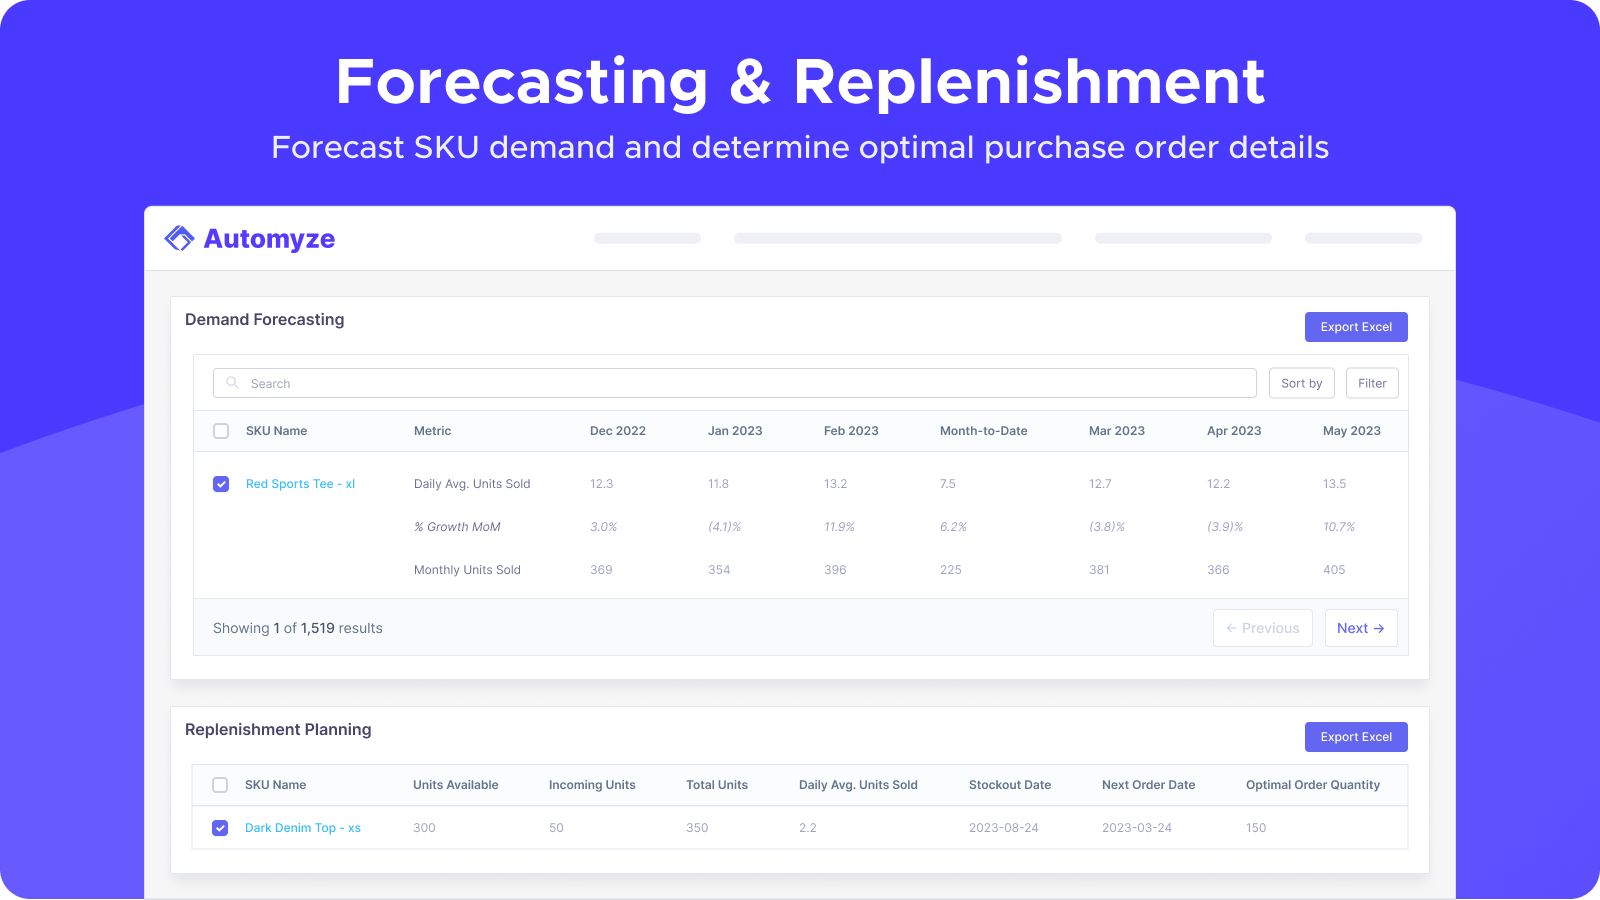 Forecast SKU demand and replenishment details using forecast methods based on historical trends and recent sales velocity.